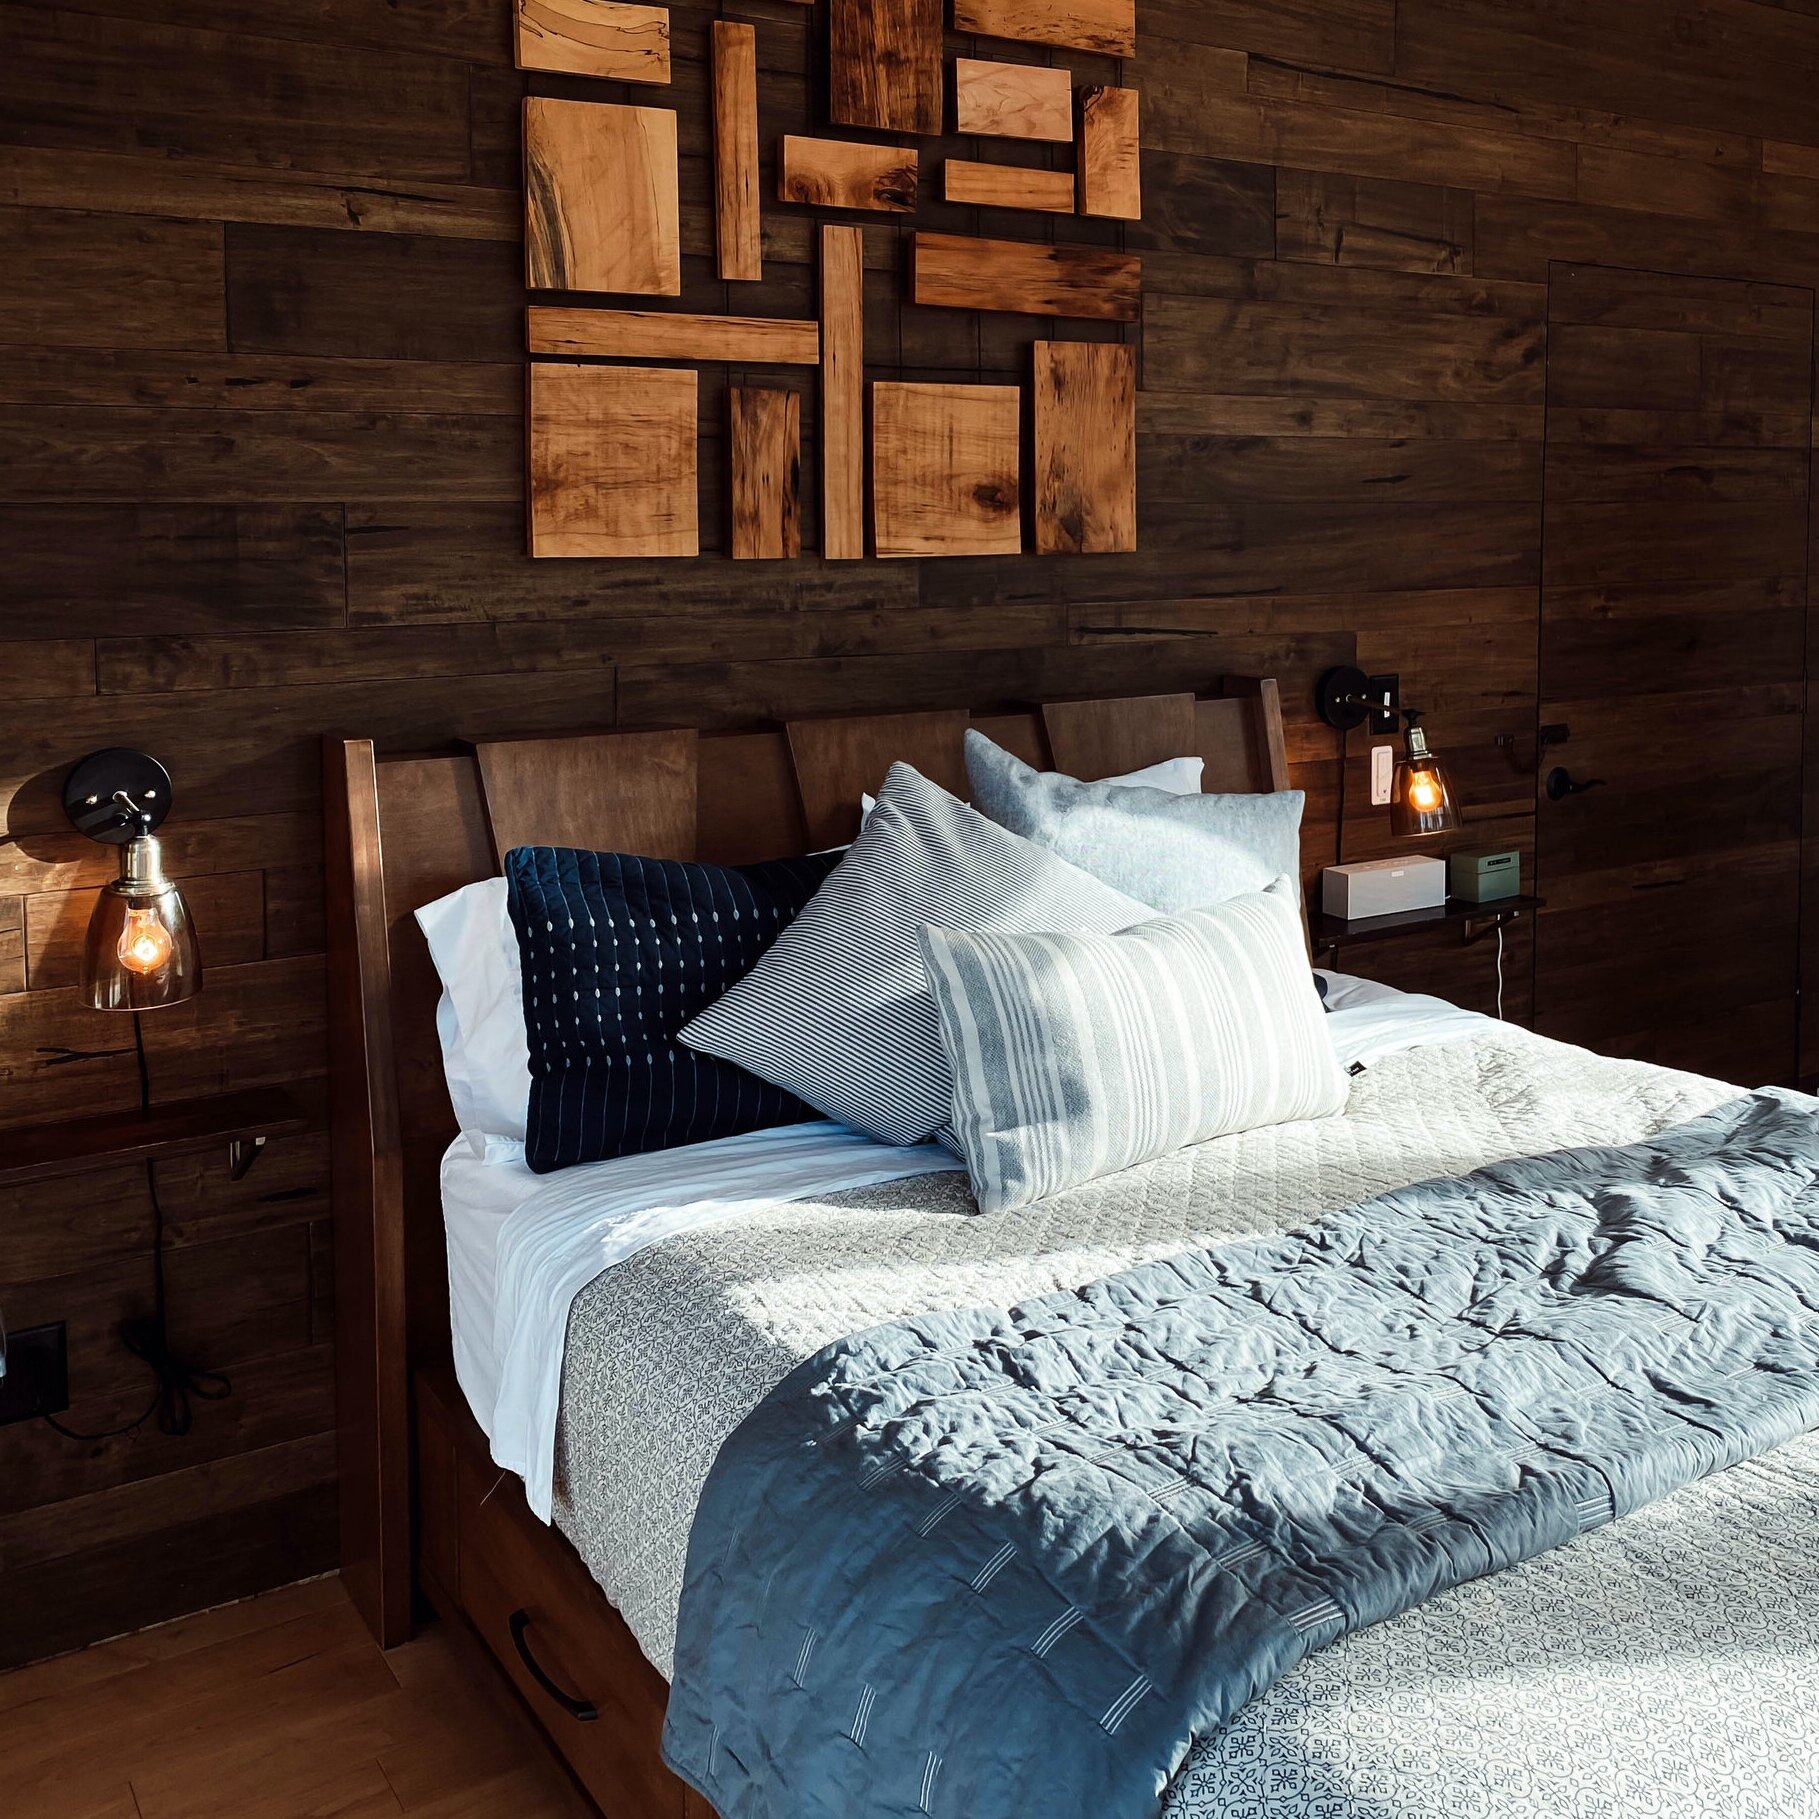 candlewood-cabin-woodland-wisconsin-bed-wood-wall.jpg